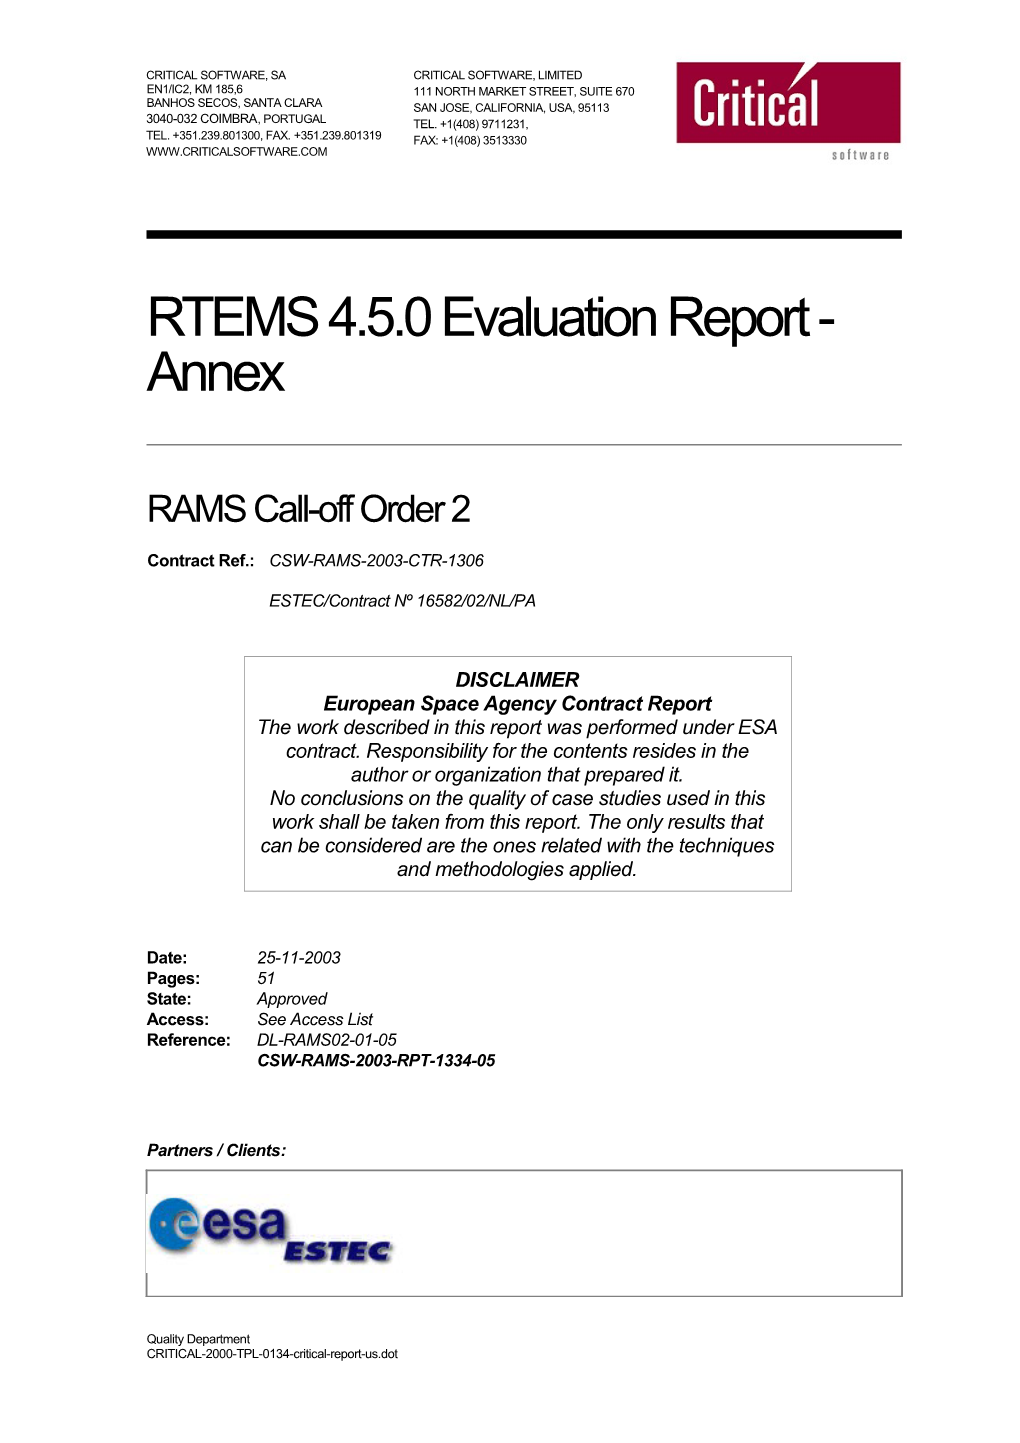 CSW-RAMS-2003-RPT-1334-05RTEMS 4.5.0 Evaluation Report - Annexrams Call-Off Order 225-11-2003